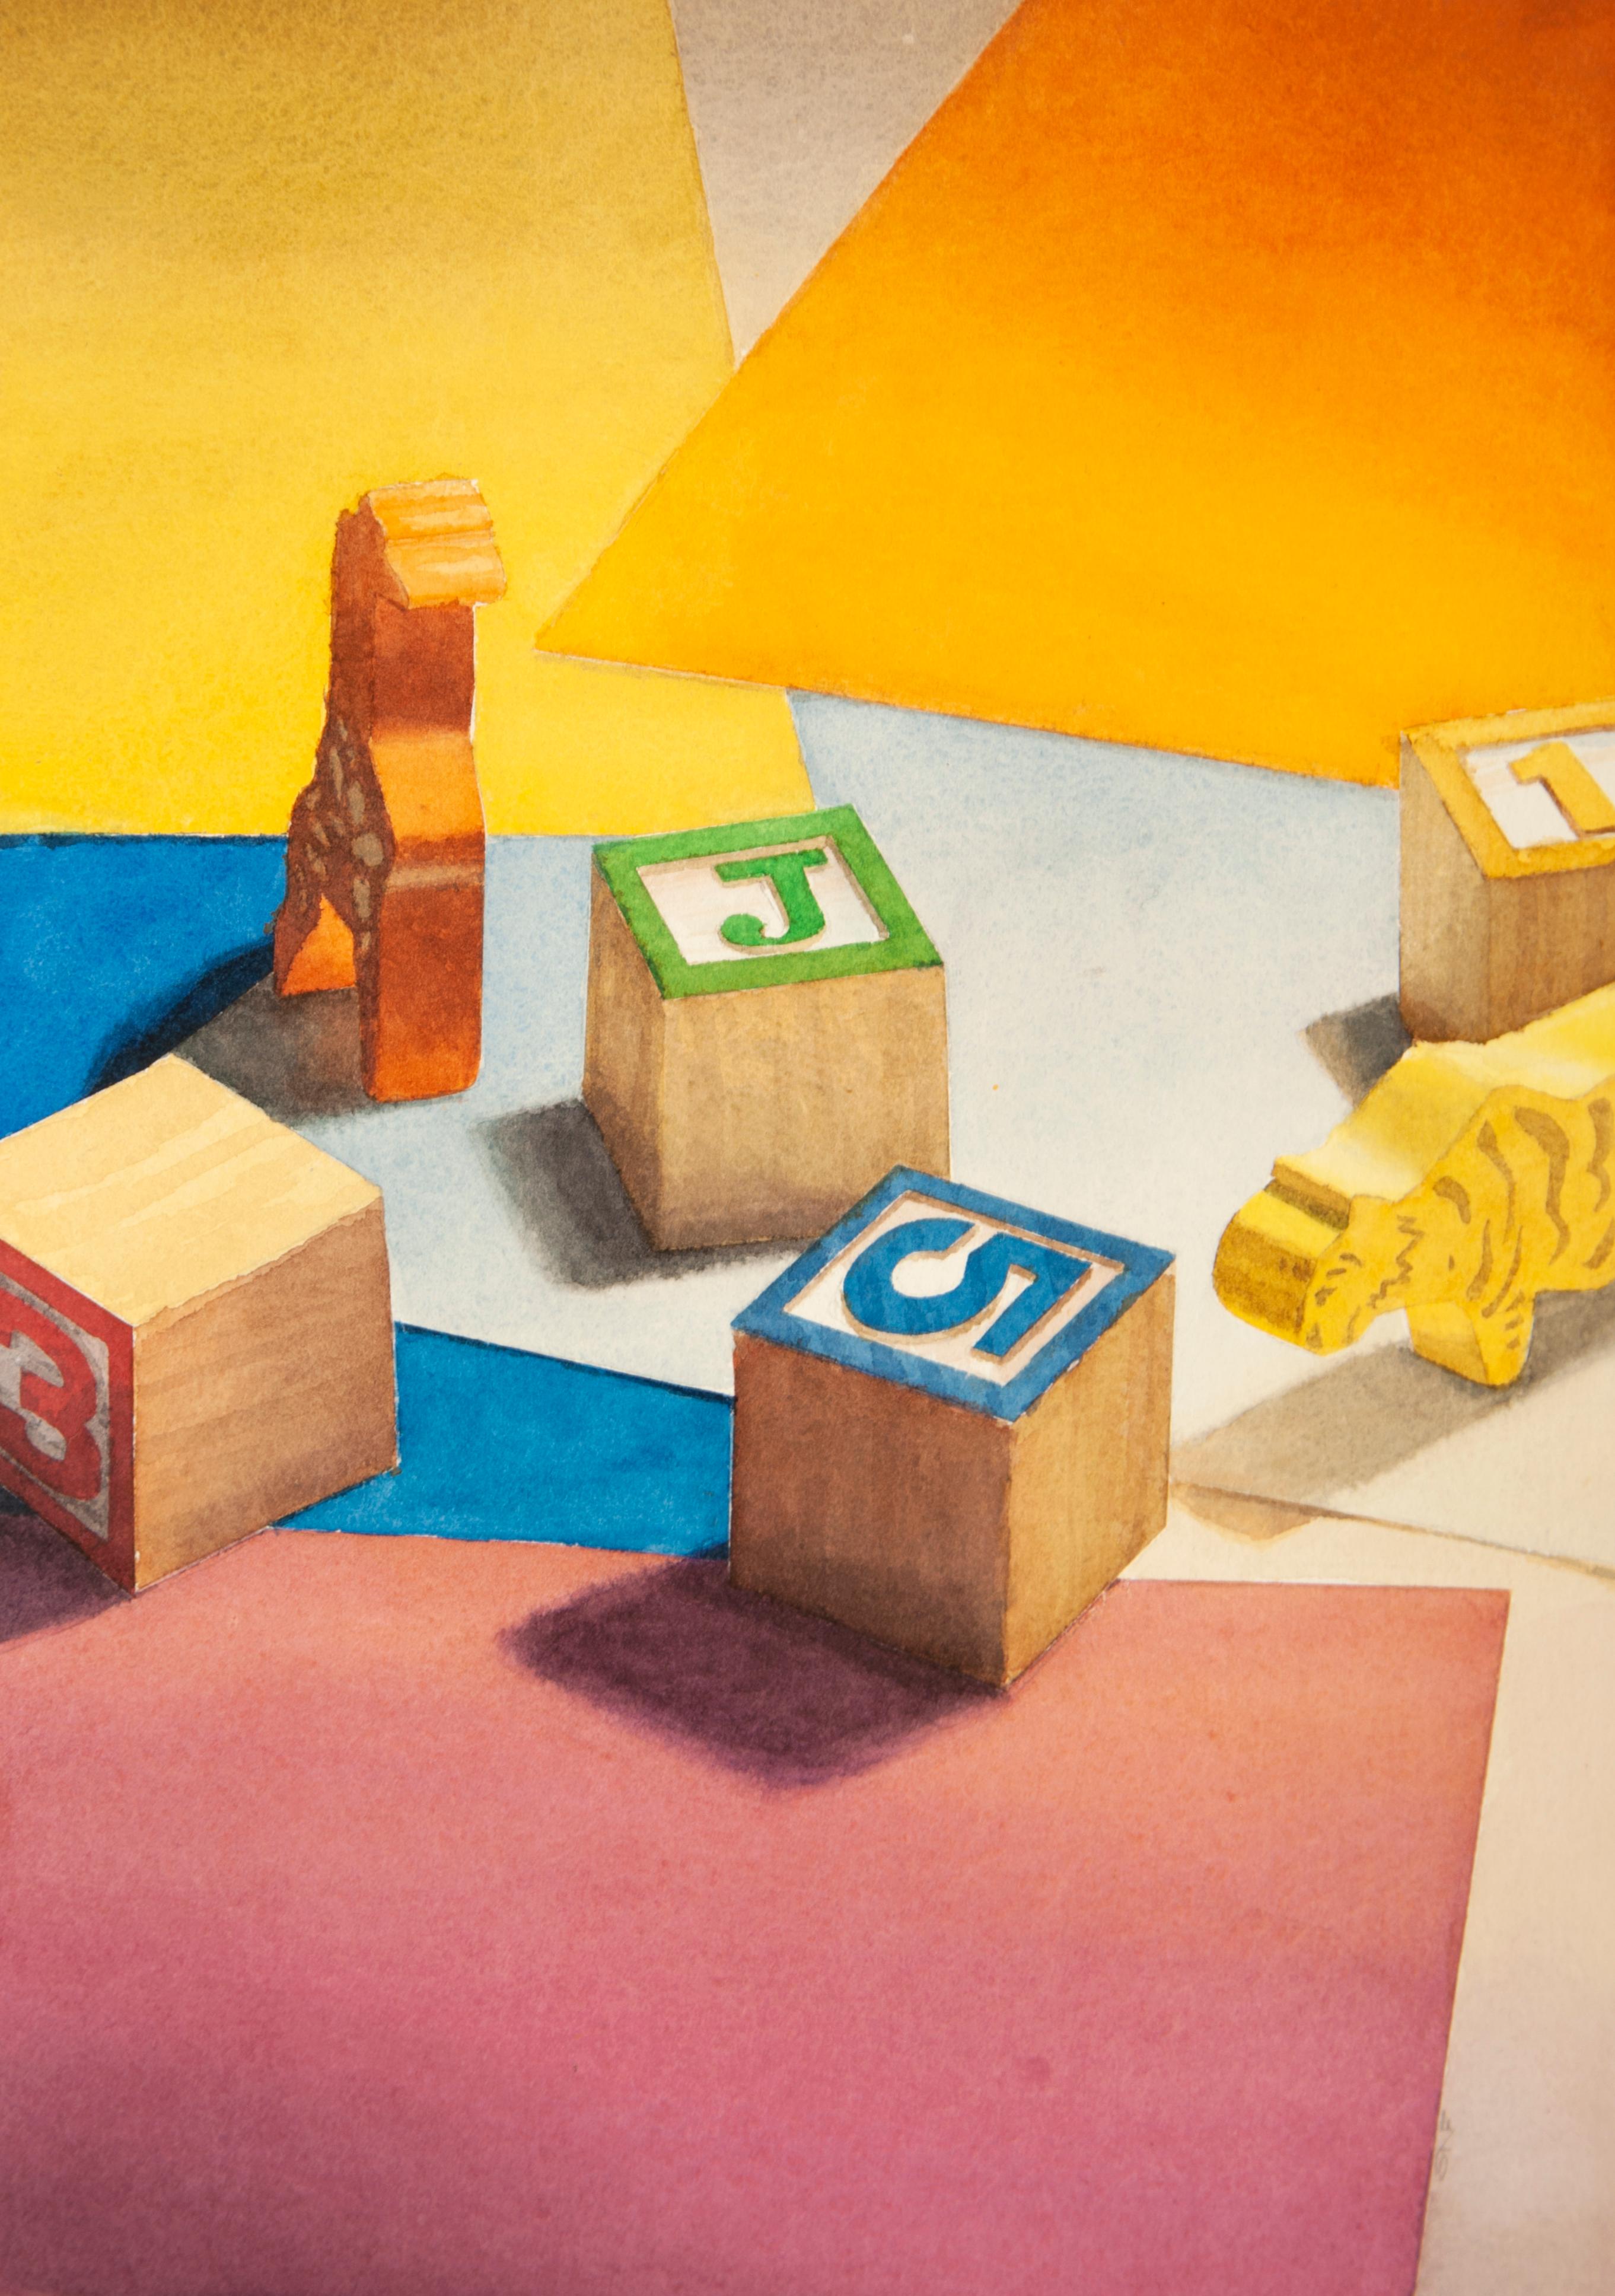 Toys (Photo-Realist Watercolor Pop Art Painting of Colorful Wood Child's Blocks)